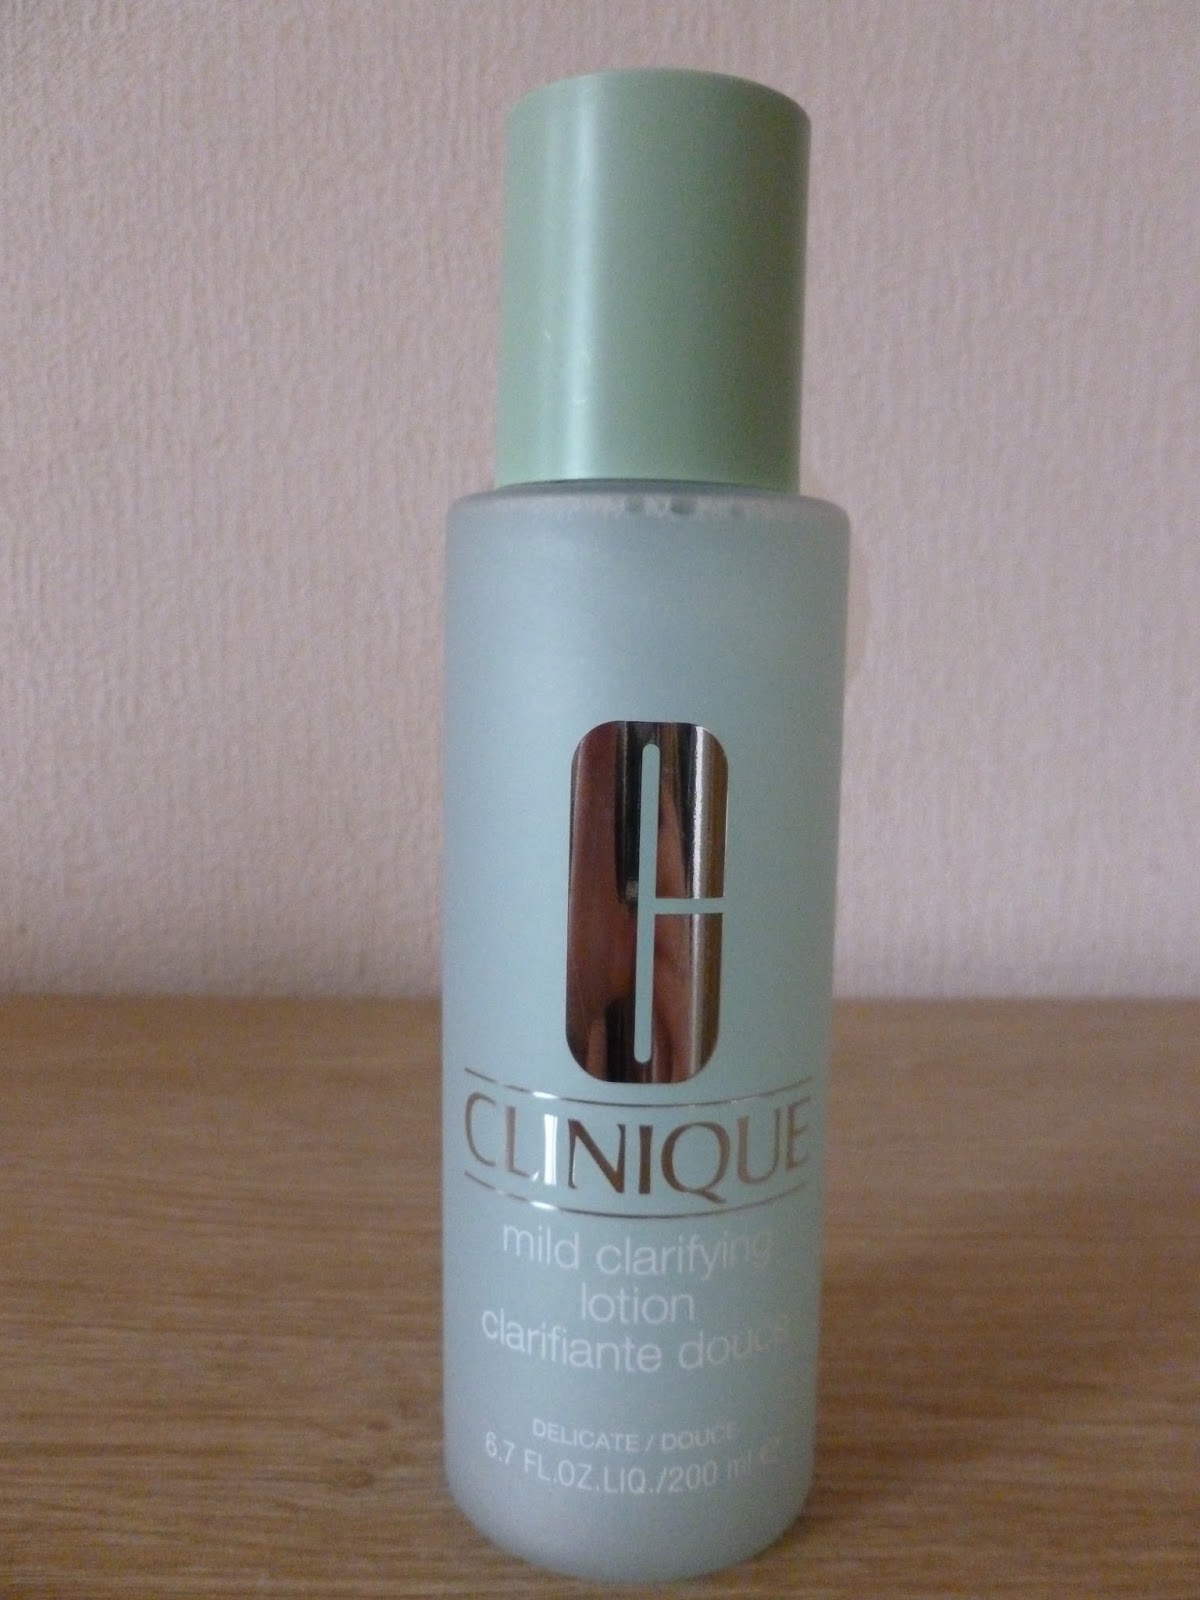 underskud Logisk kedelig Clinique Mild Clarifying Lotion - A Review | Mammaful Zo: Beauty, Life,  Plus Size Fashion & More